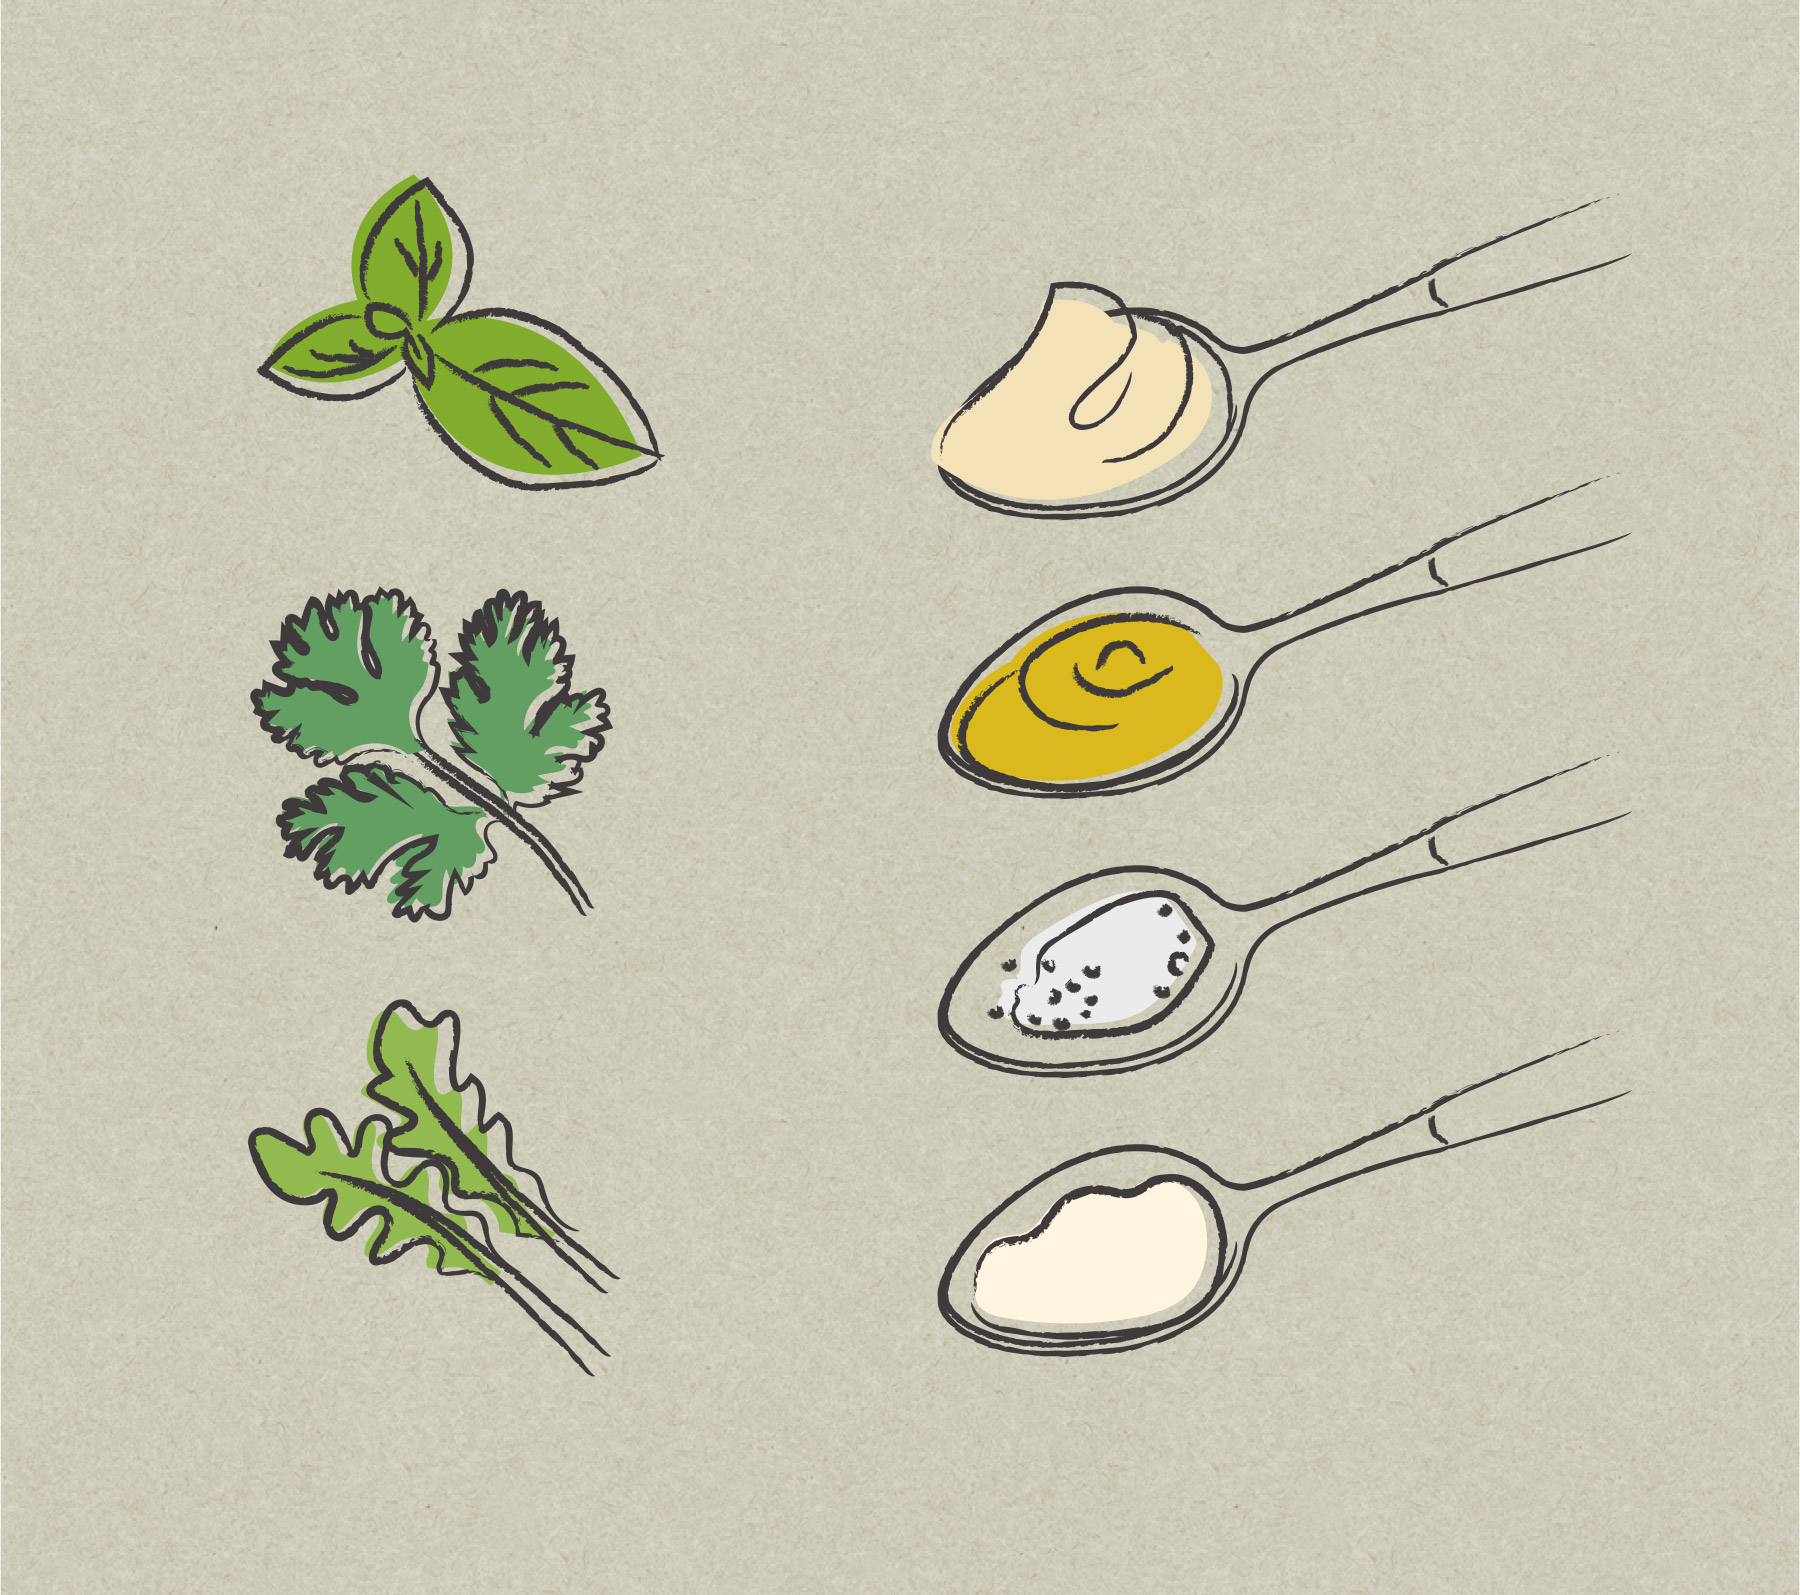 Illustrations of spices and herbs